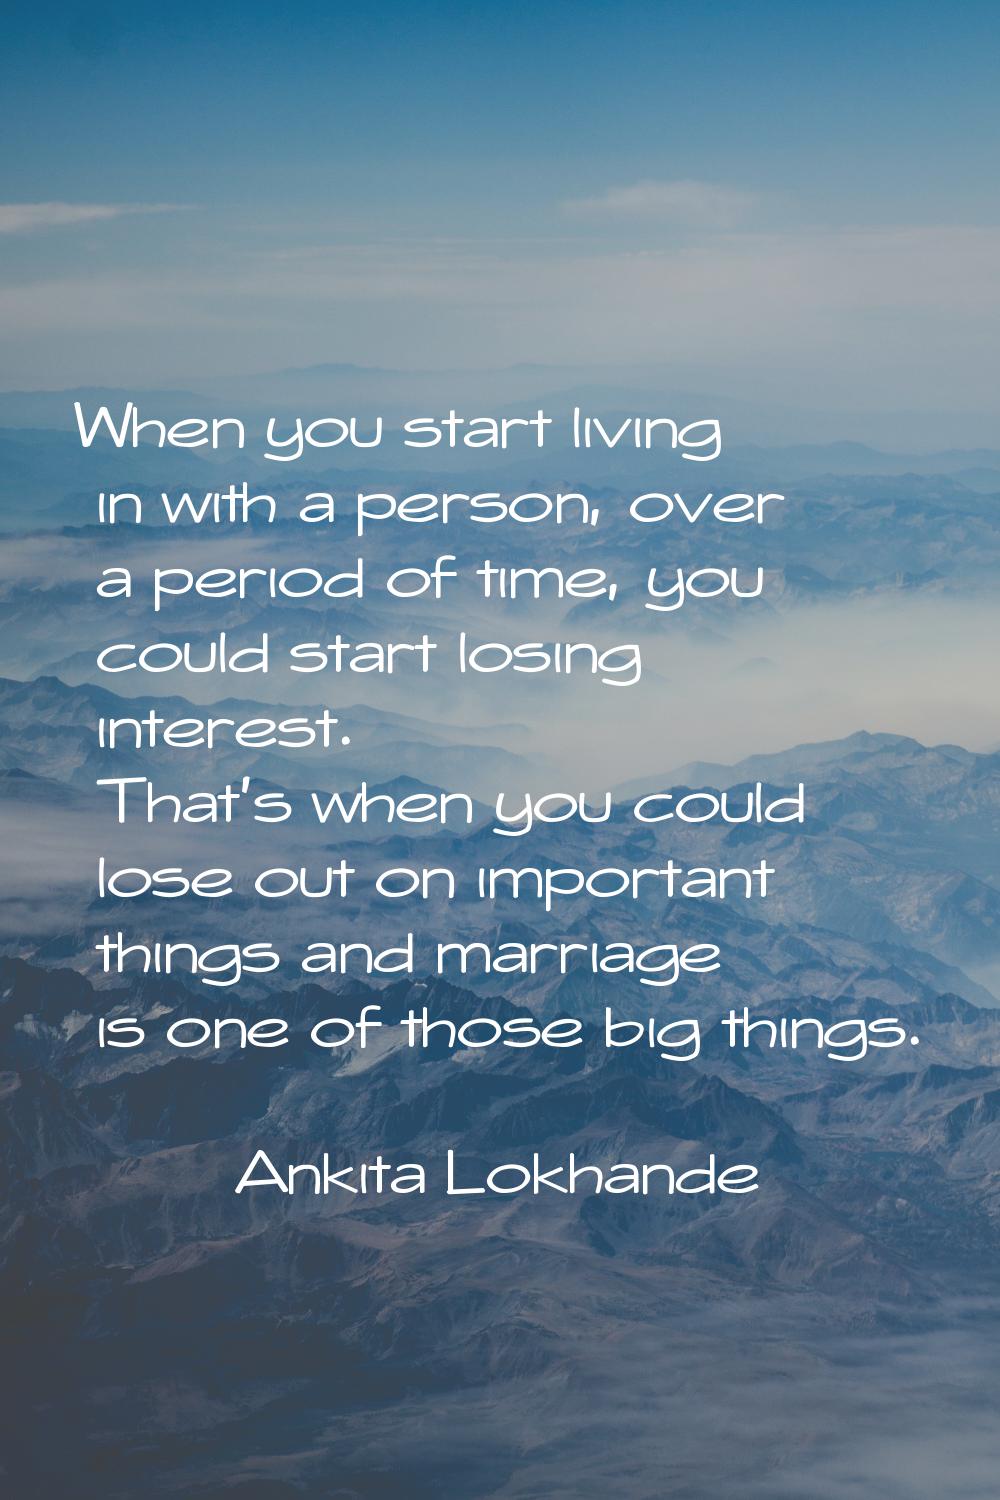 When you start living in with a person, over a period of time, you could start losing interest. Tha